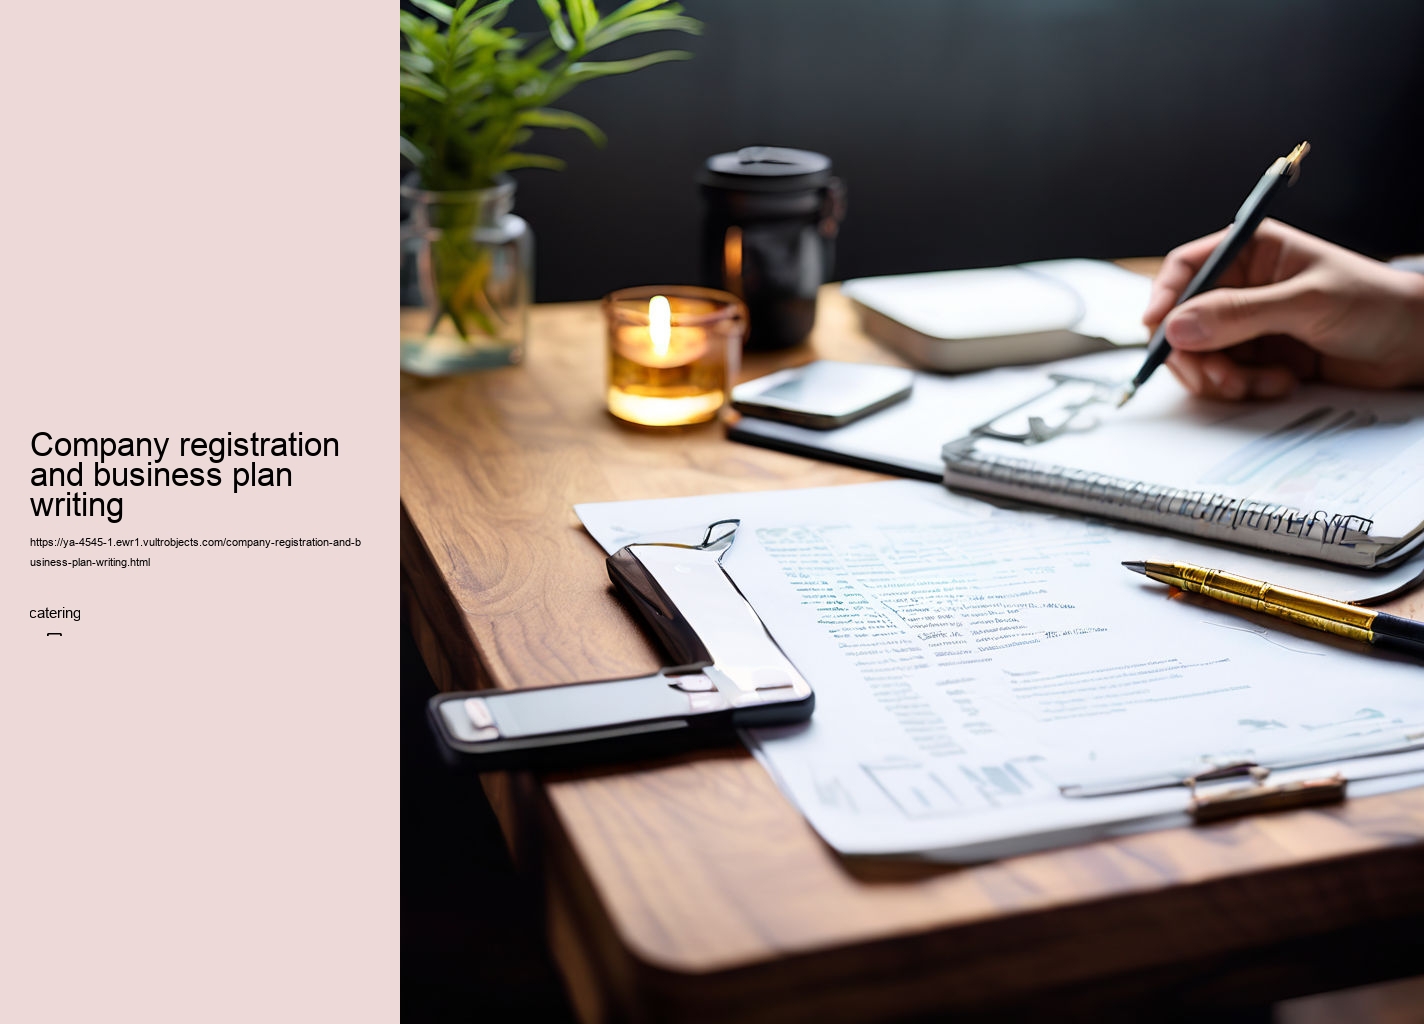 Company registration and business plan writing